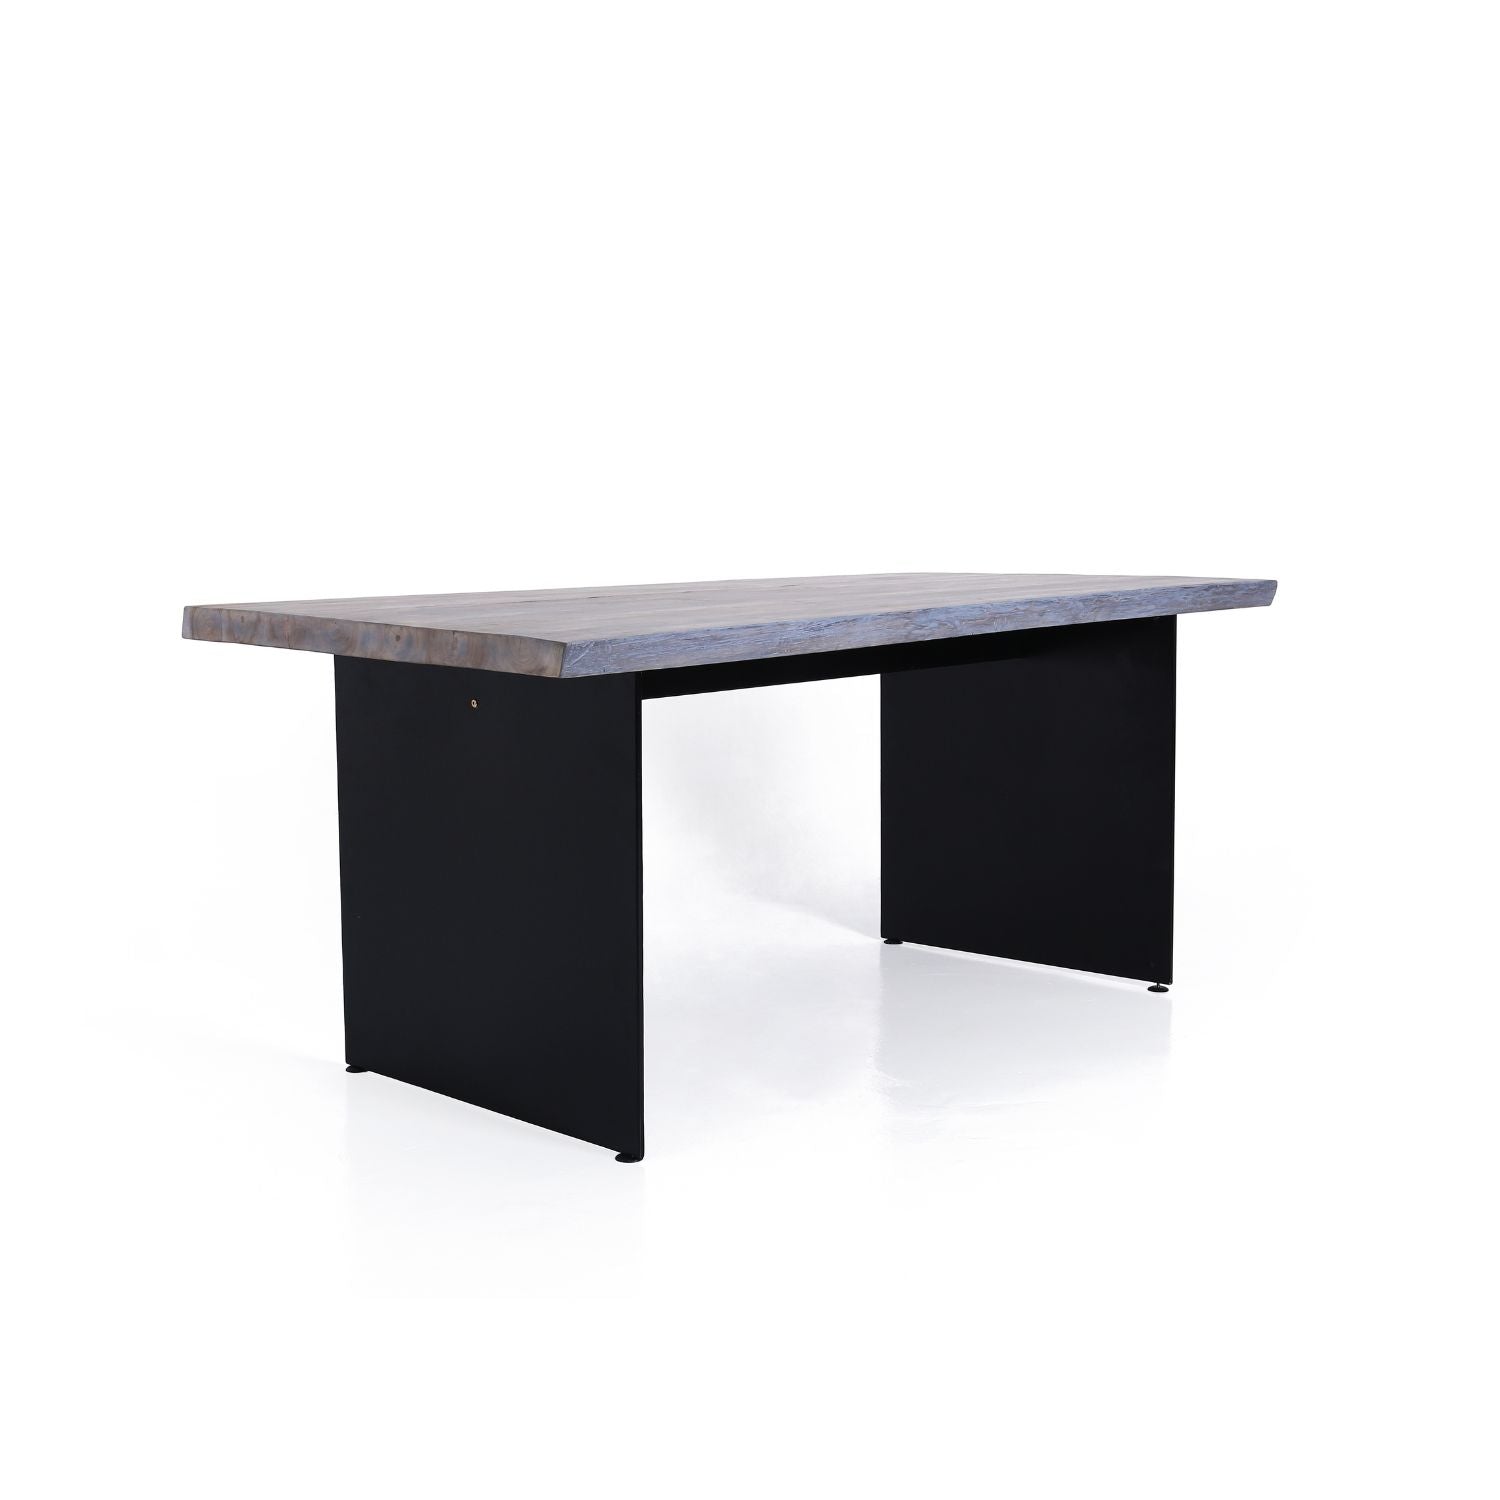 Chamfer Dining Table - Valyou 